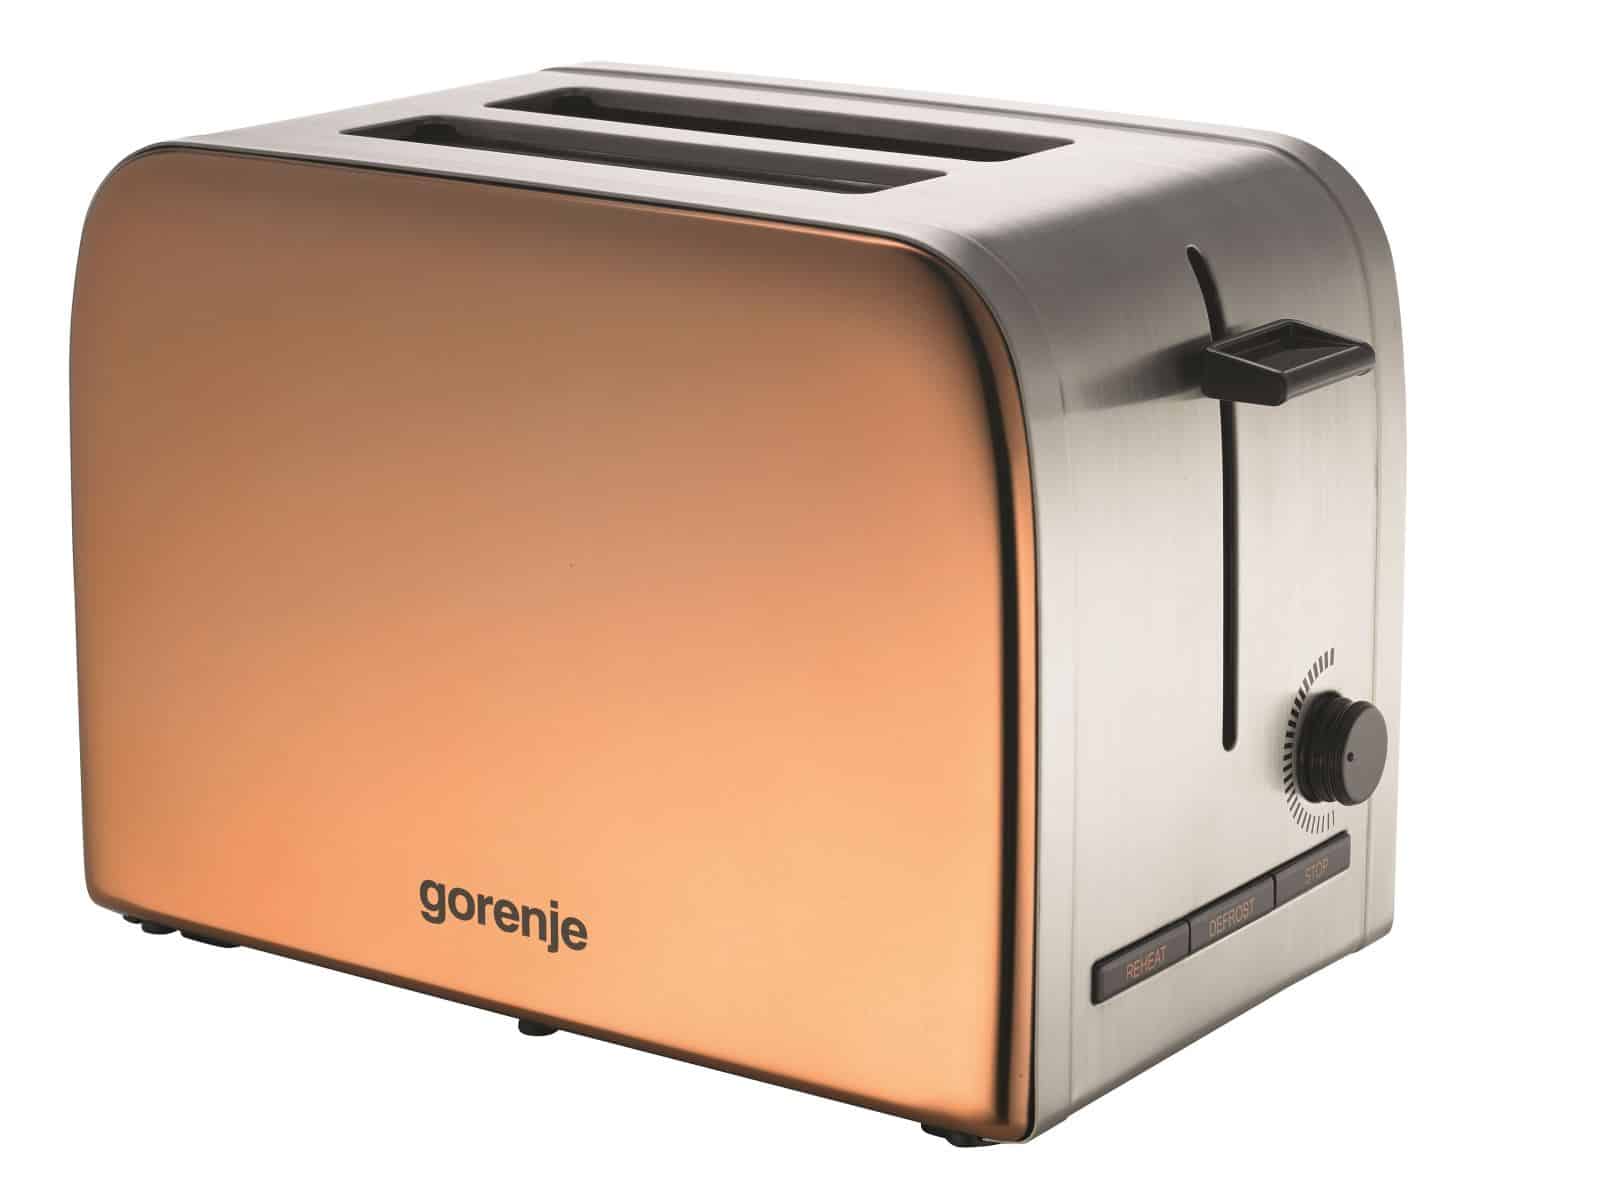 The best toasters for home - Our's list of popular models